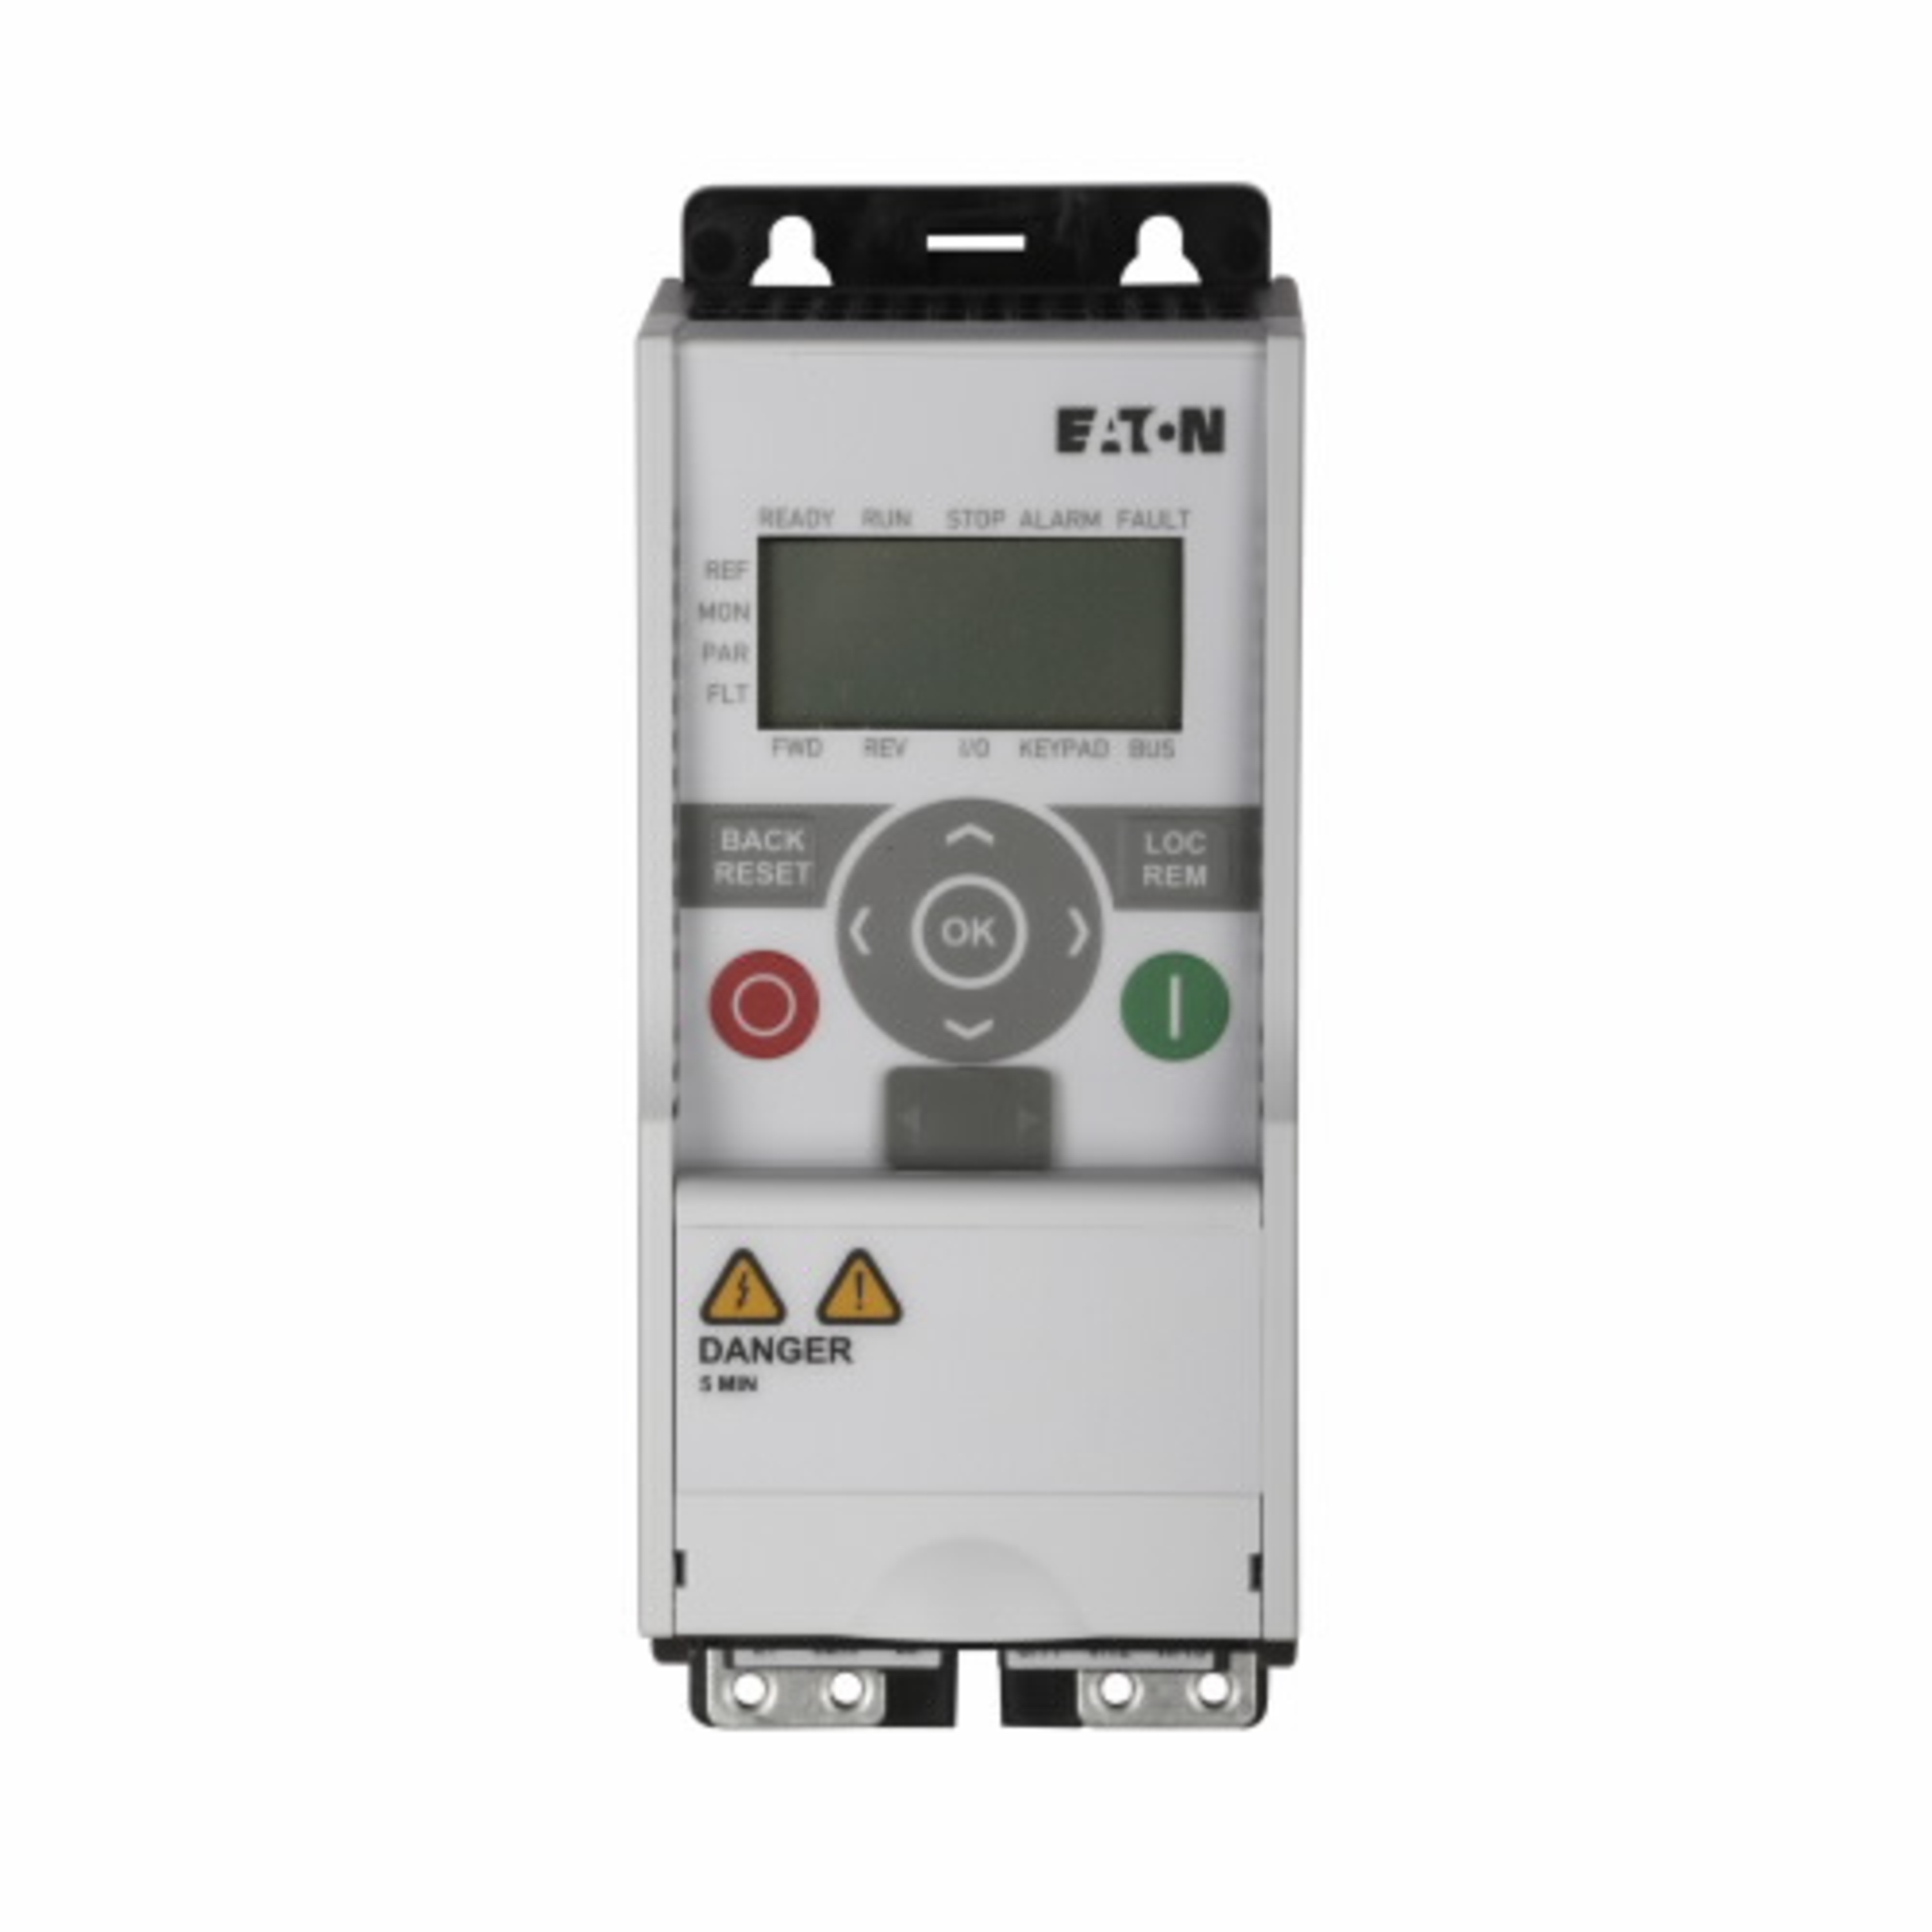 Eaton MMX12AA1D7N0-0 Eaton | Cutler Hammer MMX12AA1D7N0-0  Variable Frequency Drives AC Drives – 240VAC – 1 Phase https://gesrepair.com/wp-content/uploads/2022/Eaton/Images/Eaton_MMX12AA1D7N0-0_Variable_Frequency_Drive.jpg